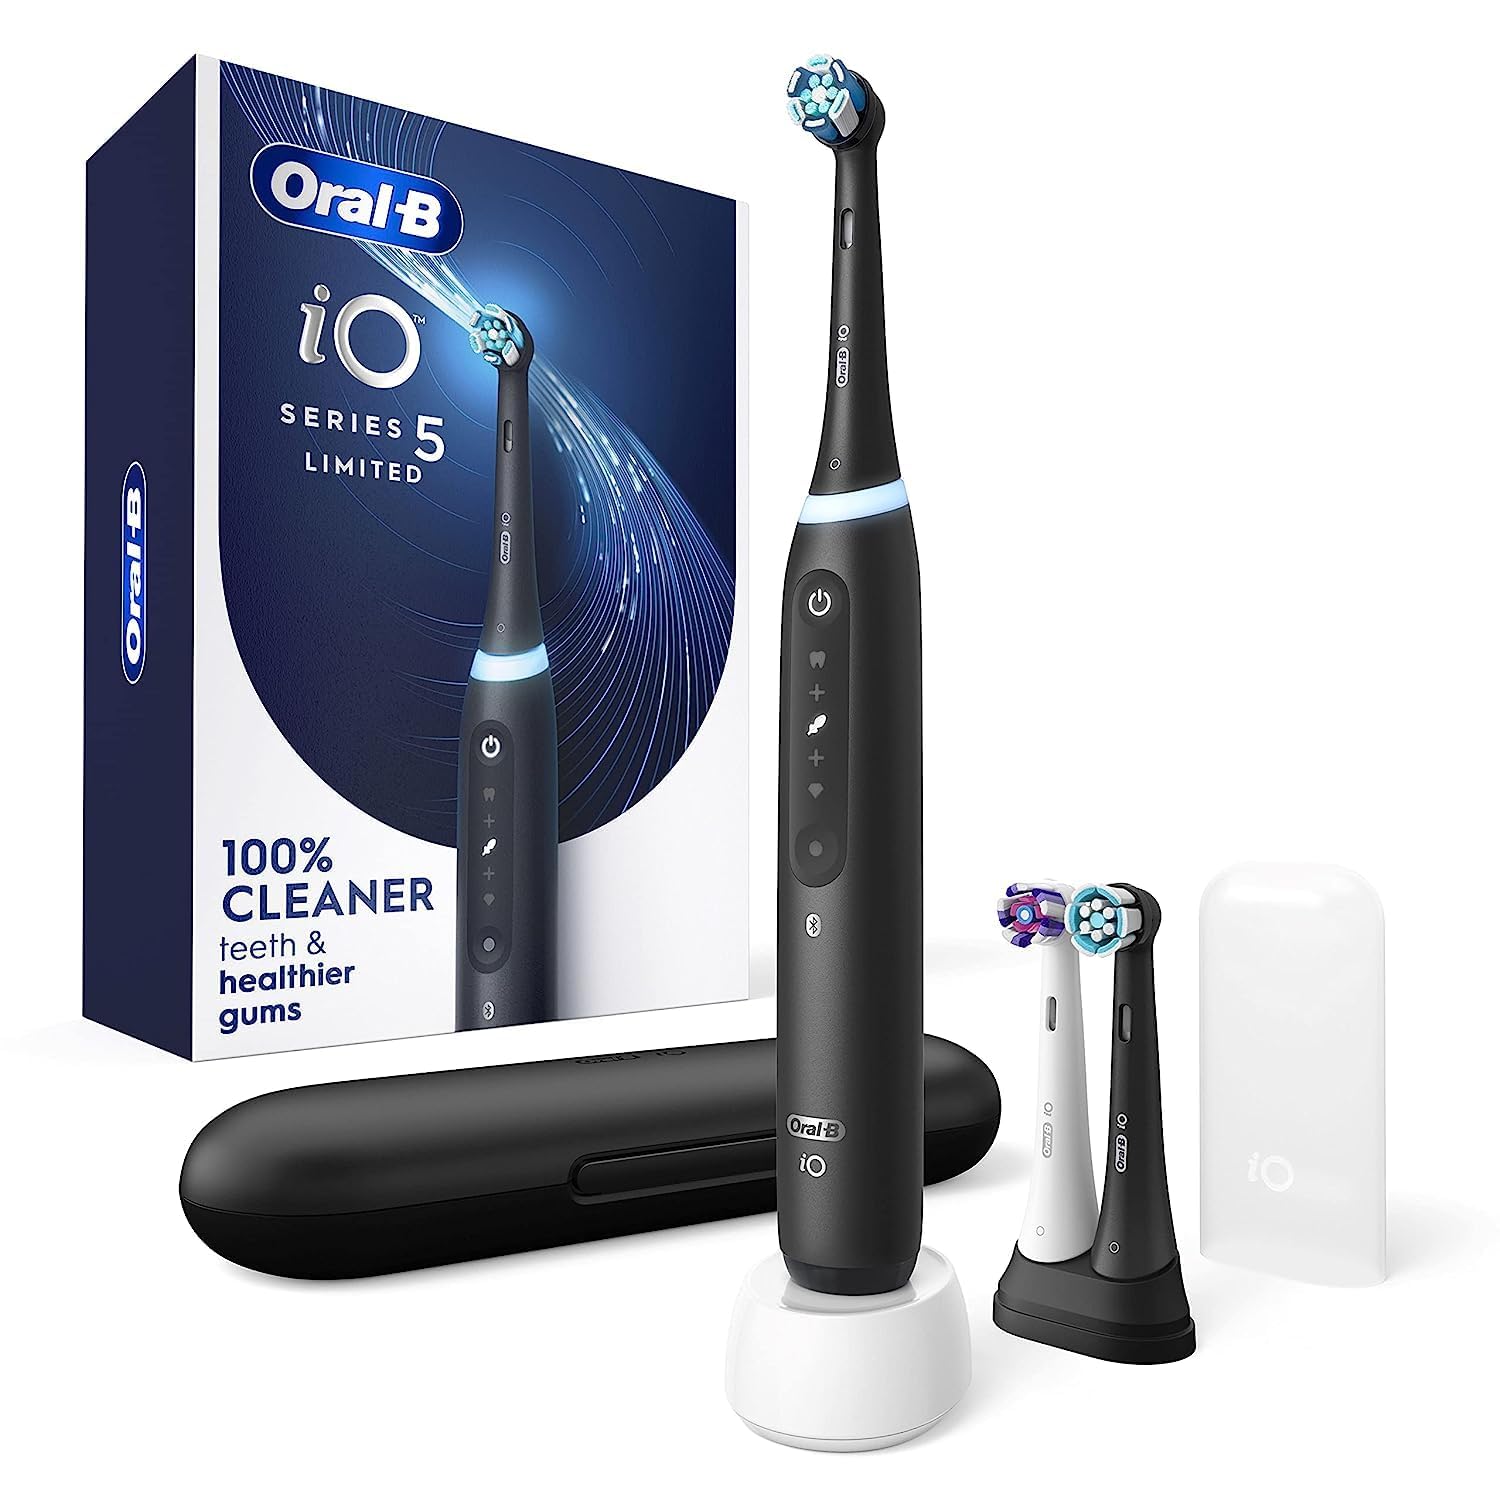 Oral-B iO Series 5 Limited Electric Toothbrush with (3) Brush Head, Rechargeable, Black